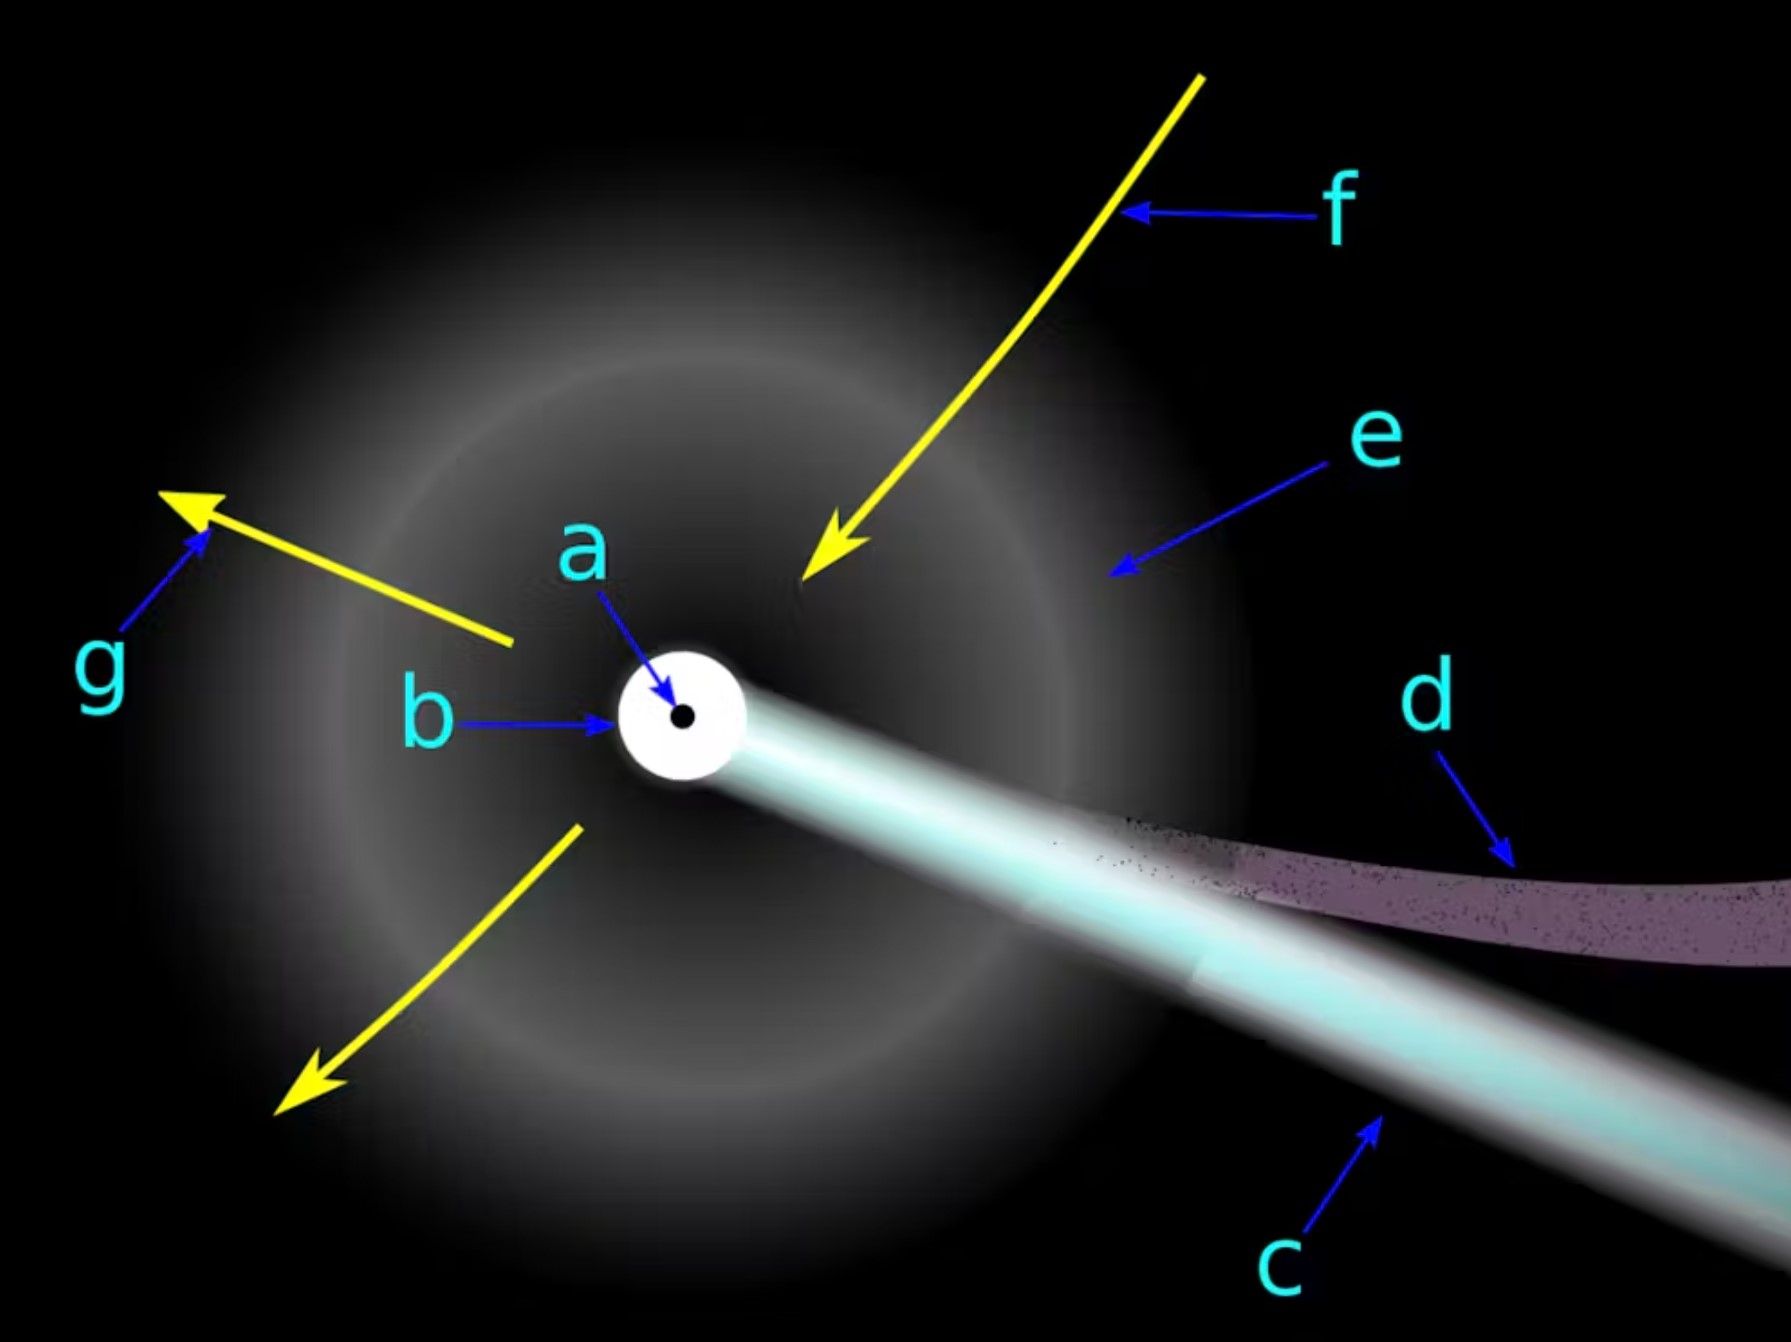 a diagram showing a bright orb with a fuzzy white streak streaming out of it